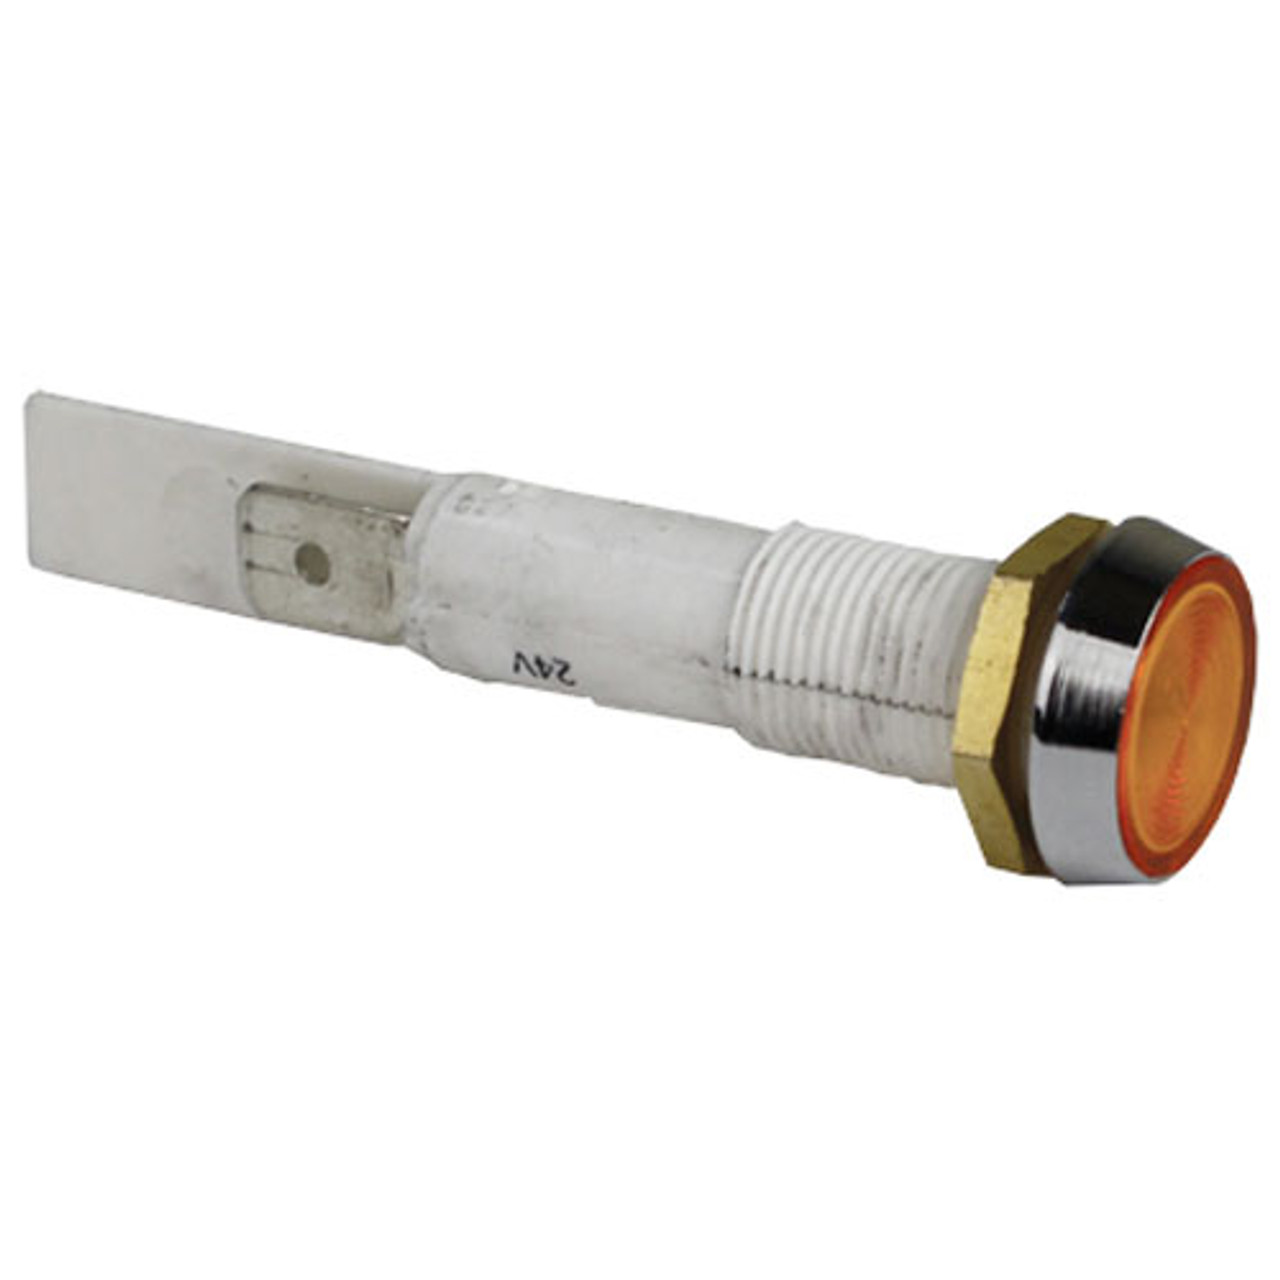 Indicator Lamp - Replacement Part For Groen 116384